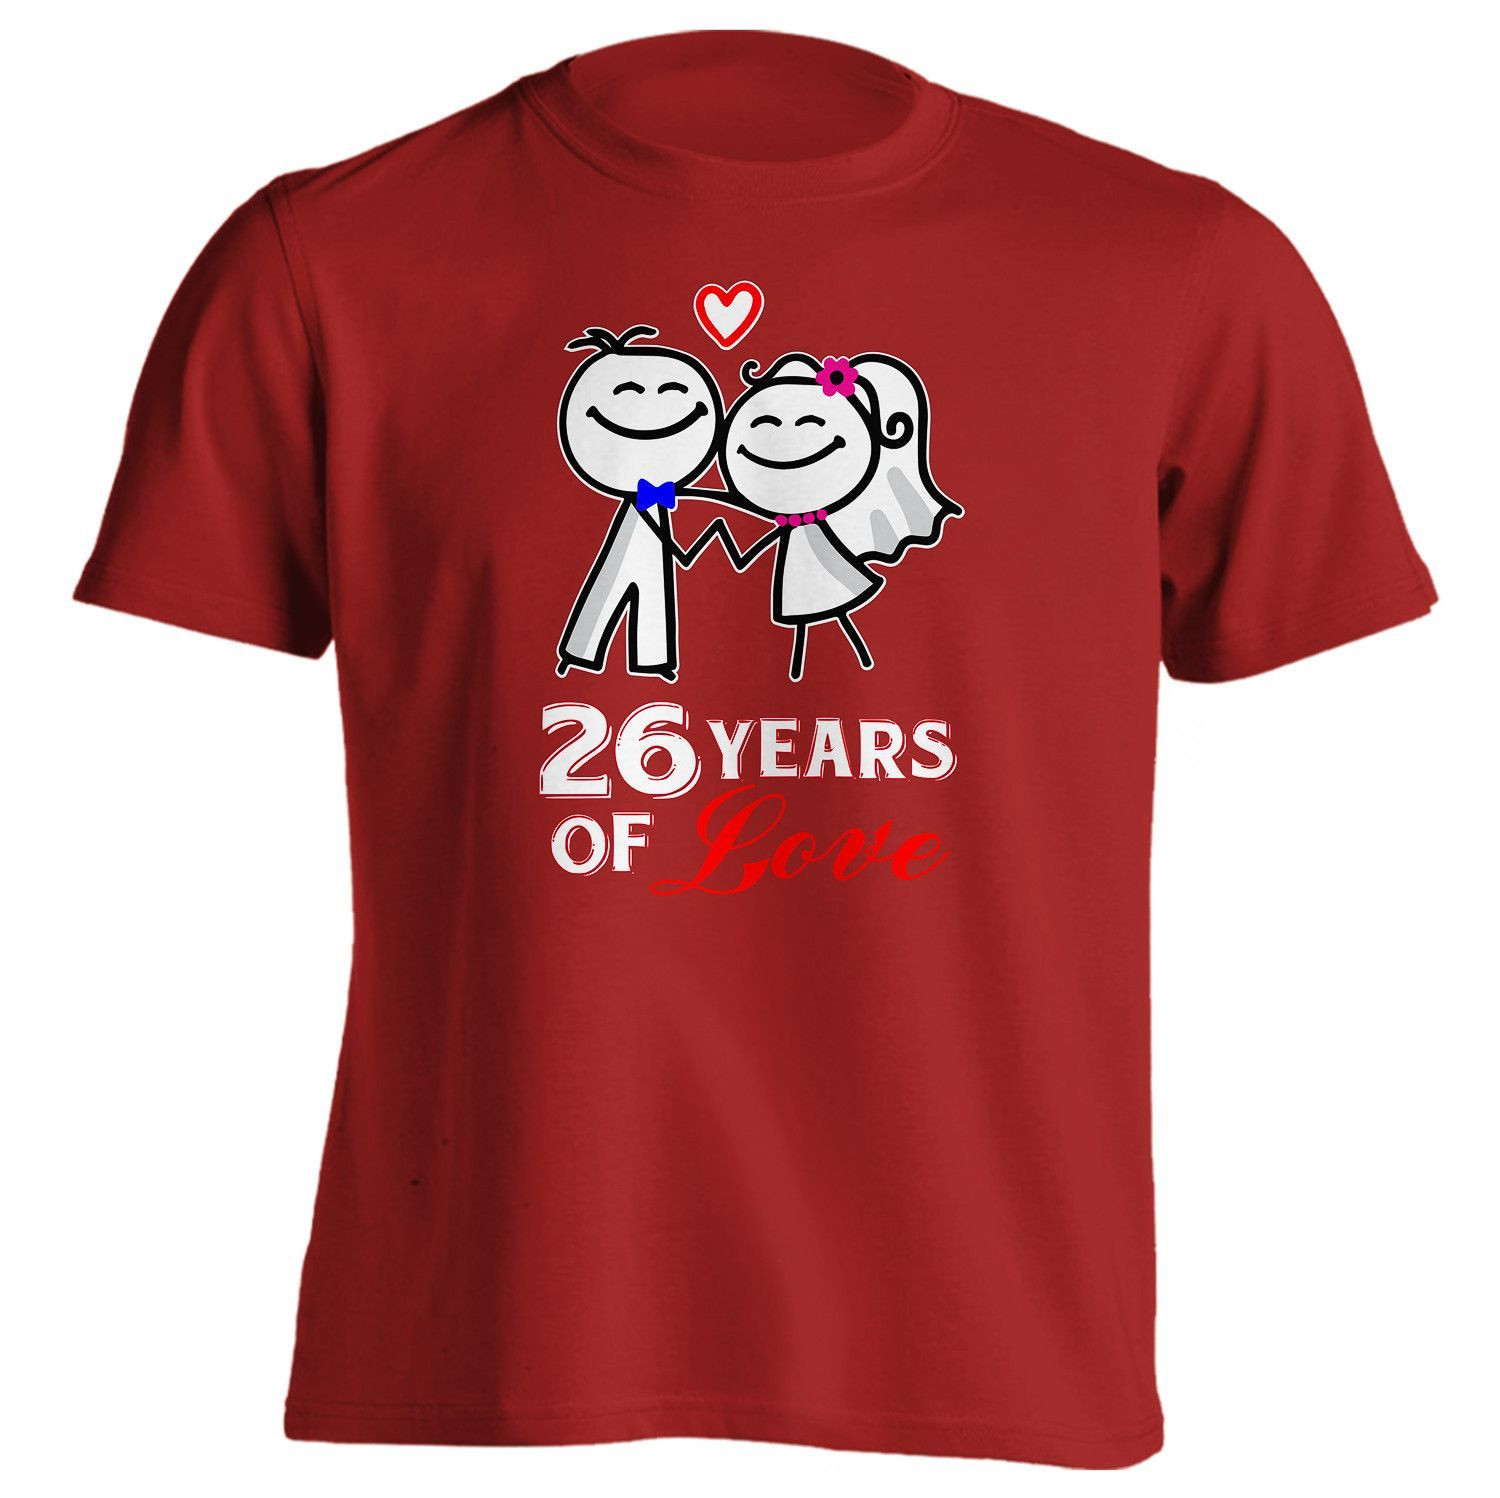 Wedding Sparklers Direct Coupon
 26th Anniversary Gift 26 Years of Love Shirt